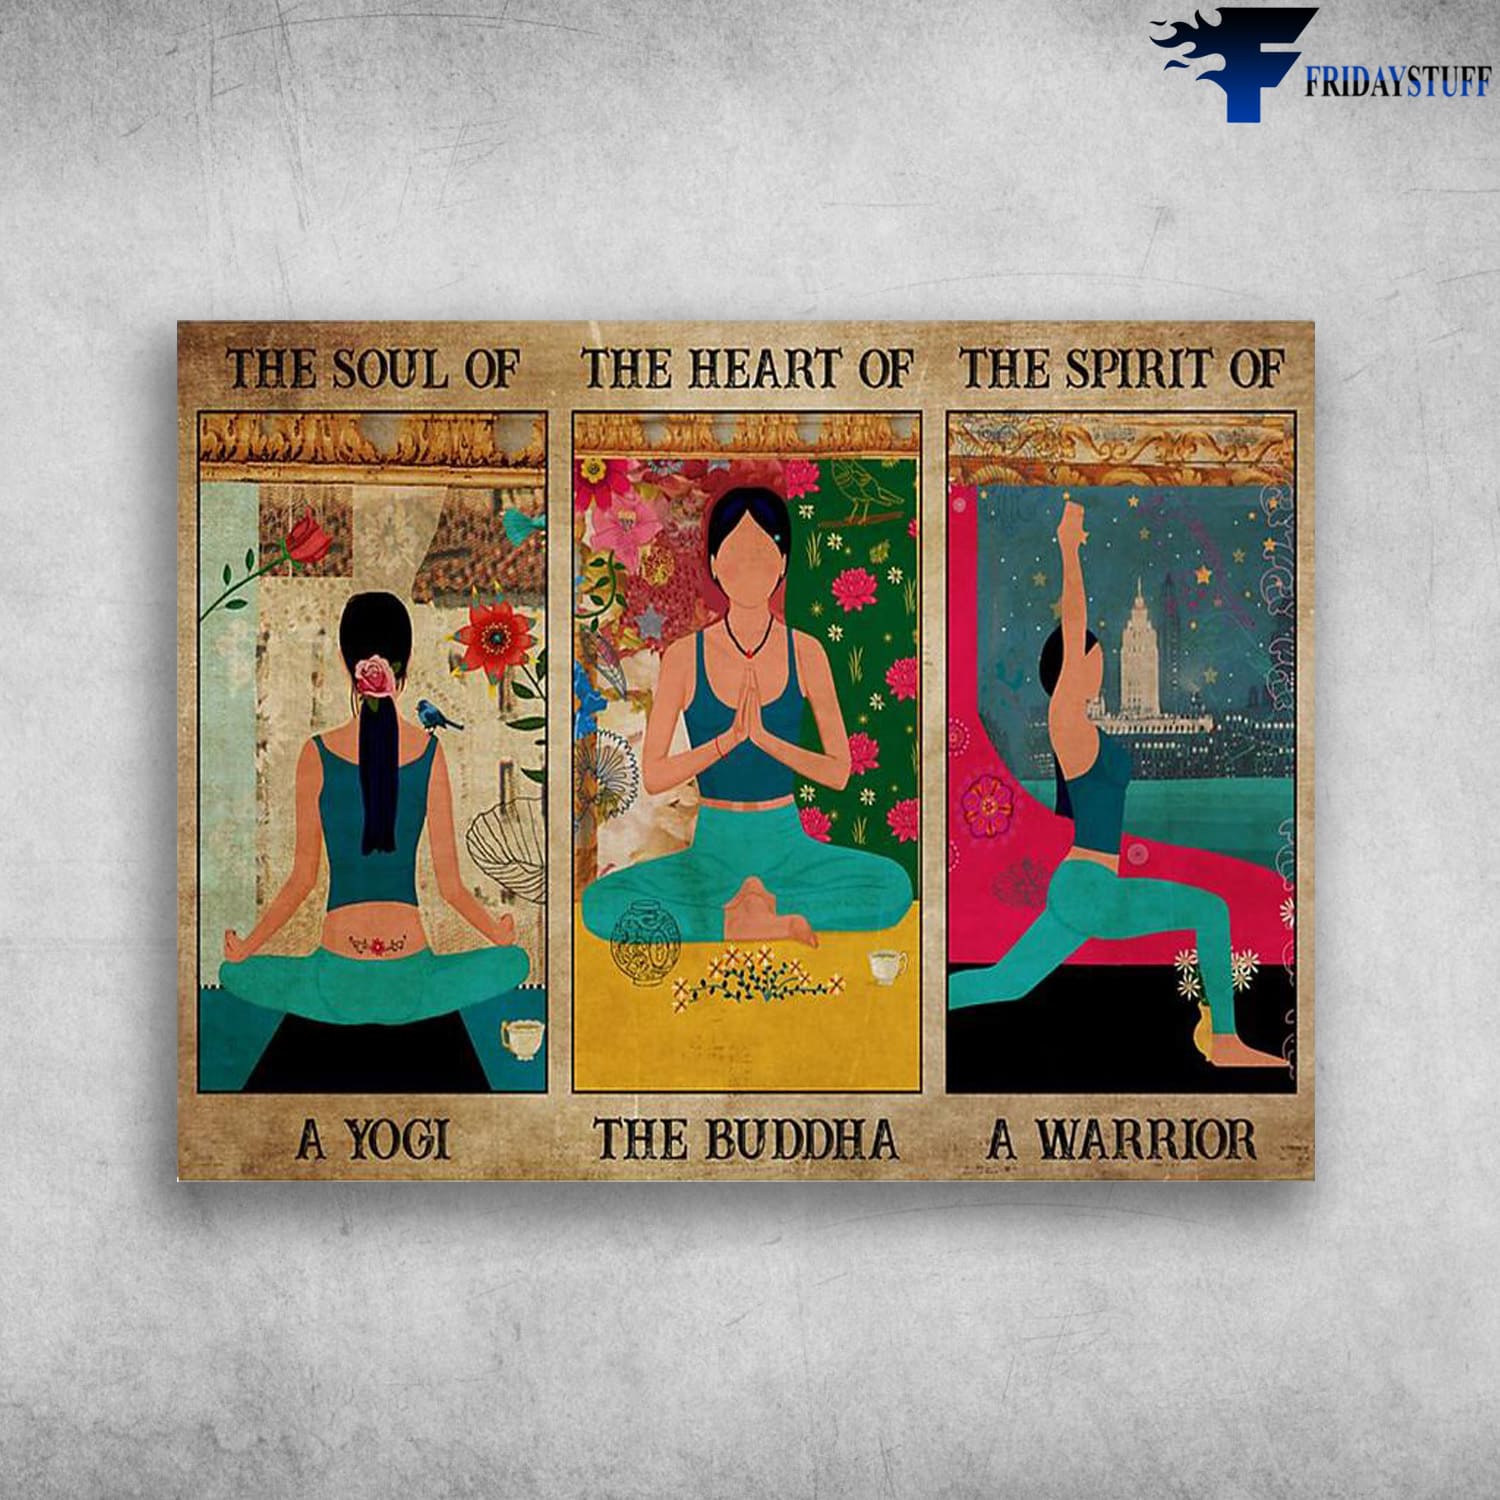 Yoga Poster,Yoga Girl, The Soul Of A Yoga, The Heart Of The Buddha, The Spirit Of A Warrior